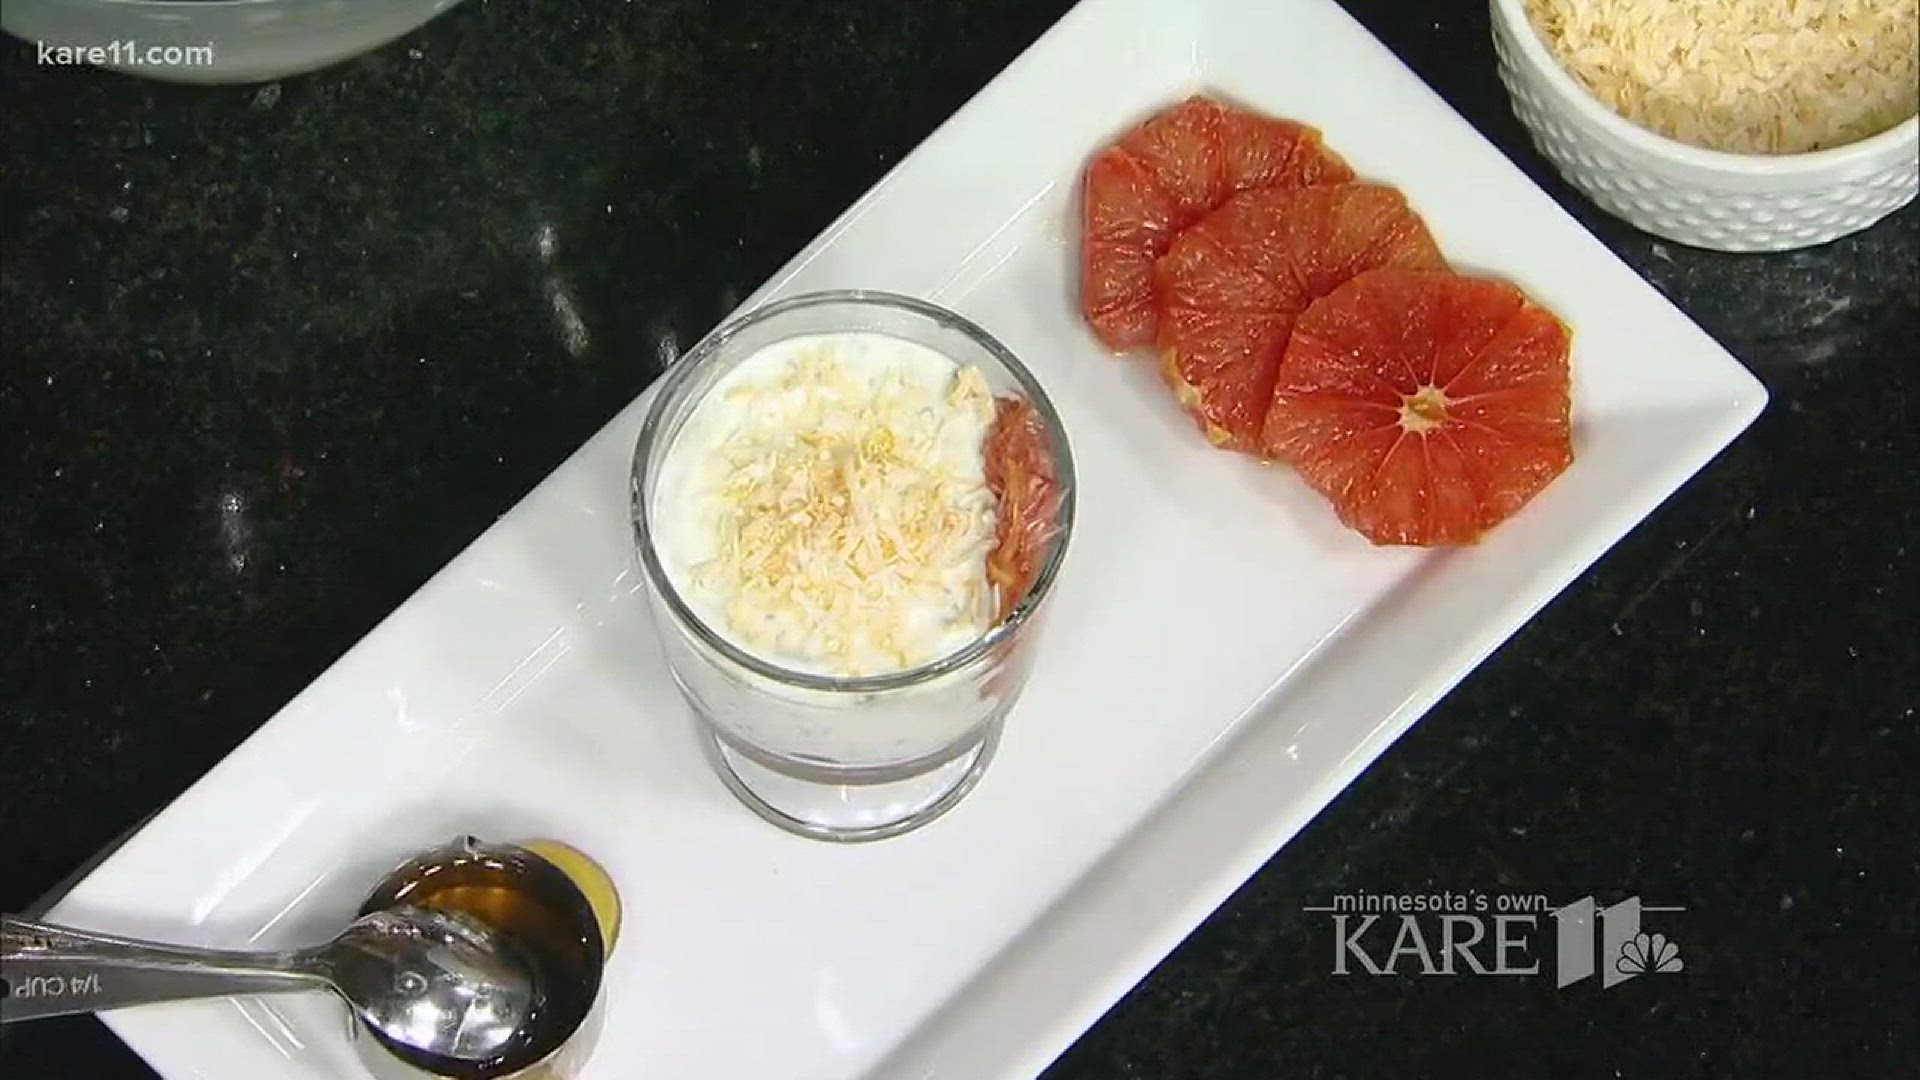 Savage Hy-Vee dietitian Melissa Bradley, RD, LD, will show you how to create delicious breakfast parfaits featuring grapefruit. http://kare11.tv/2EfKqc6